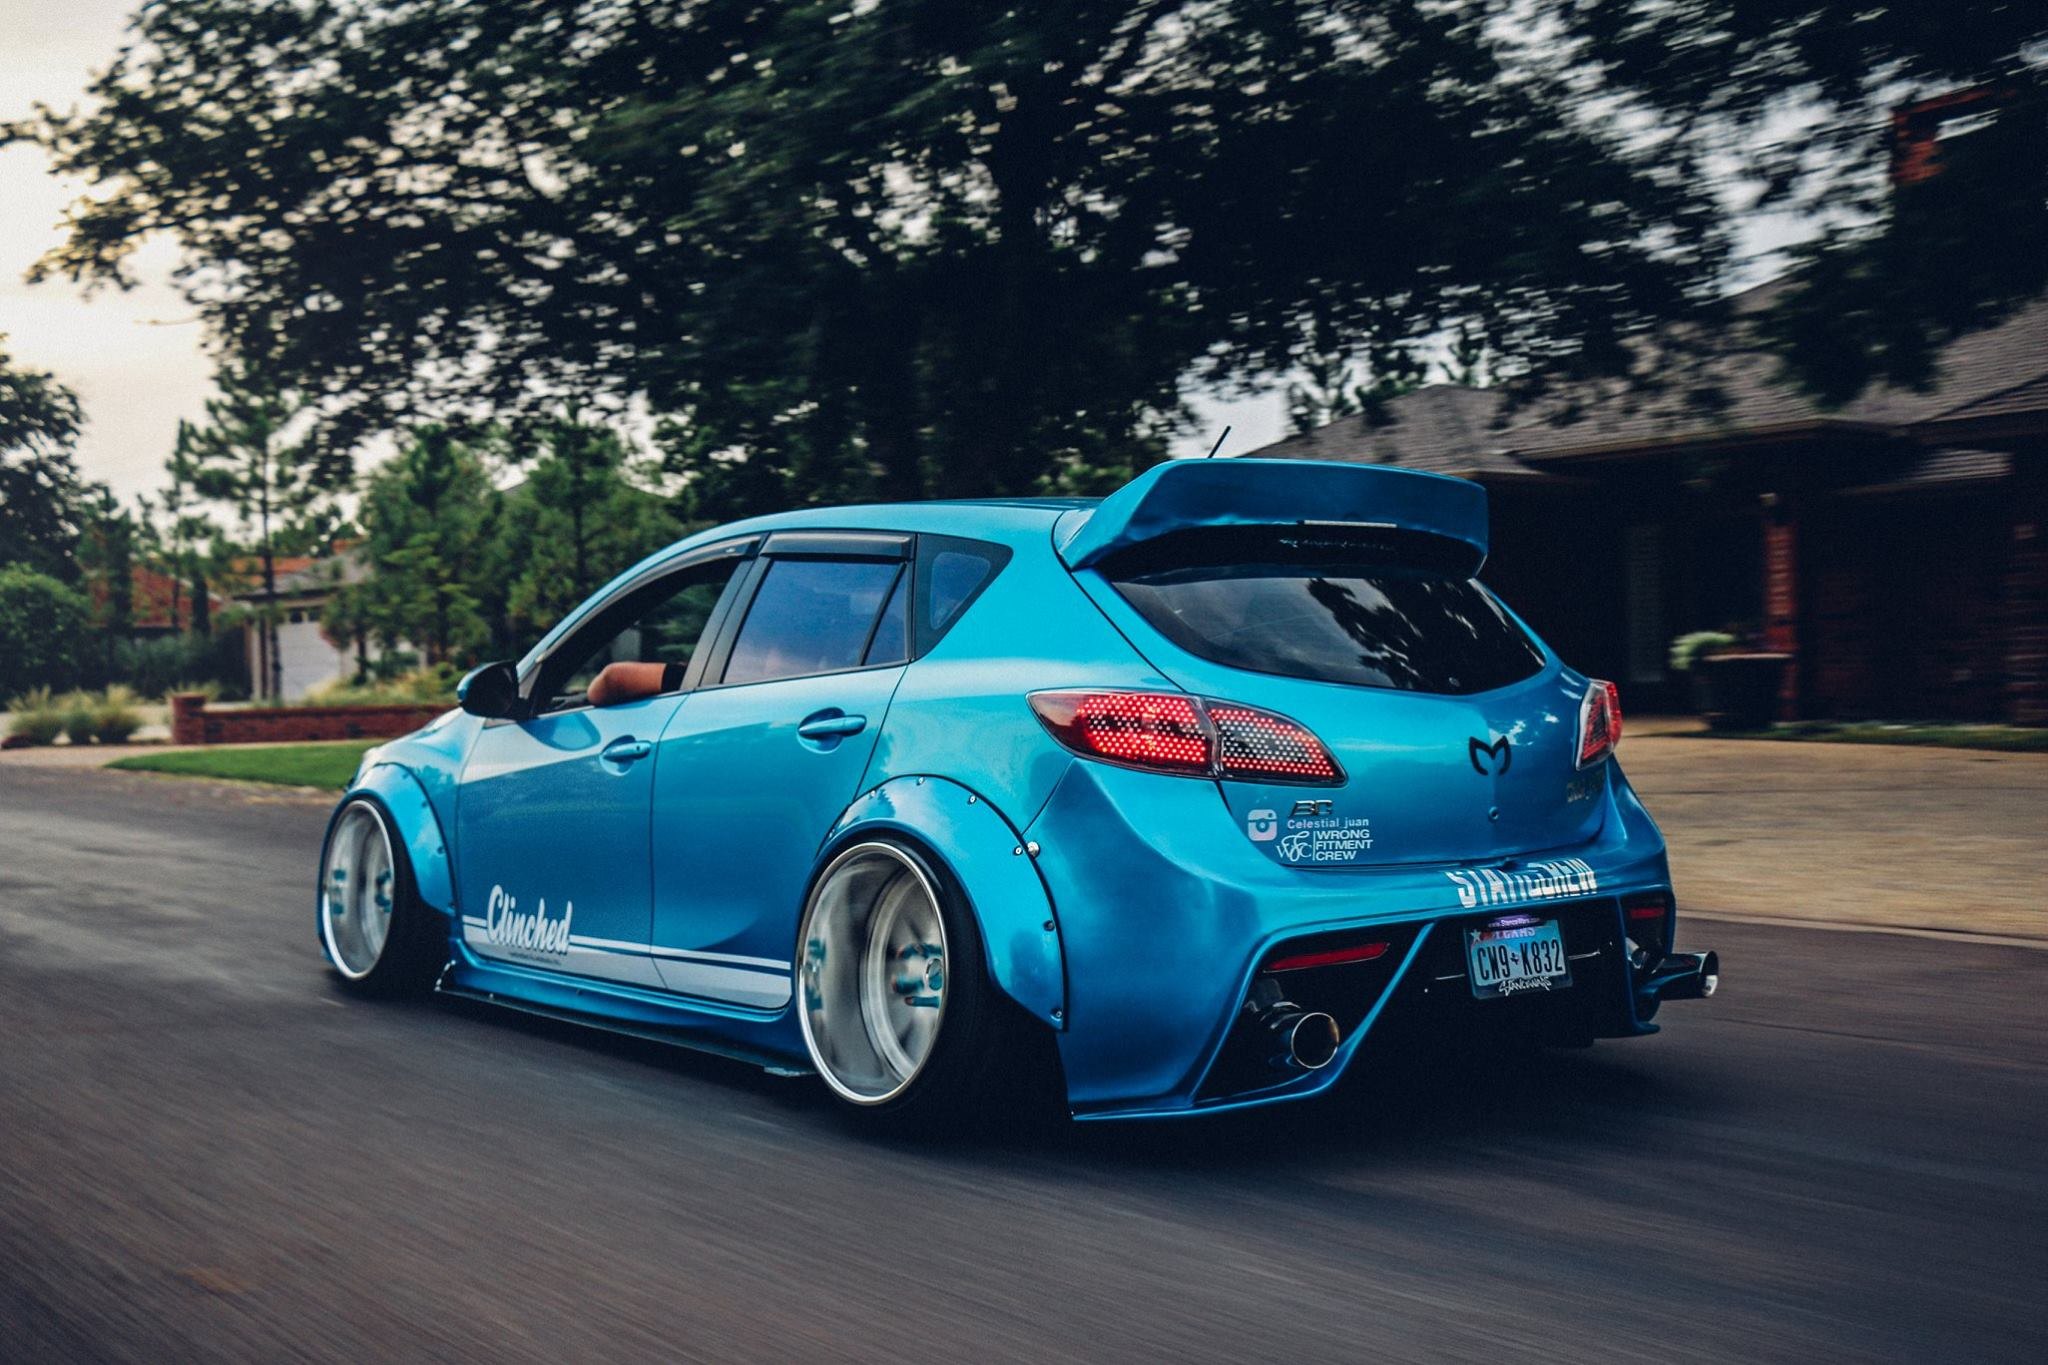 Blue Debadged Mazda 3 with Custom Rear Diffuser - Photo by Clinched